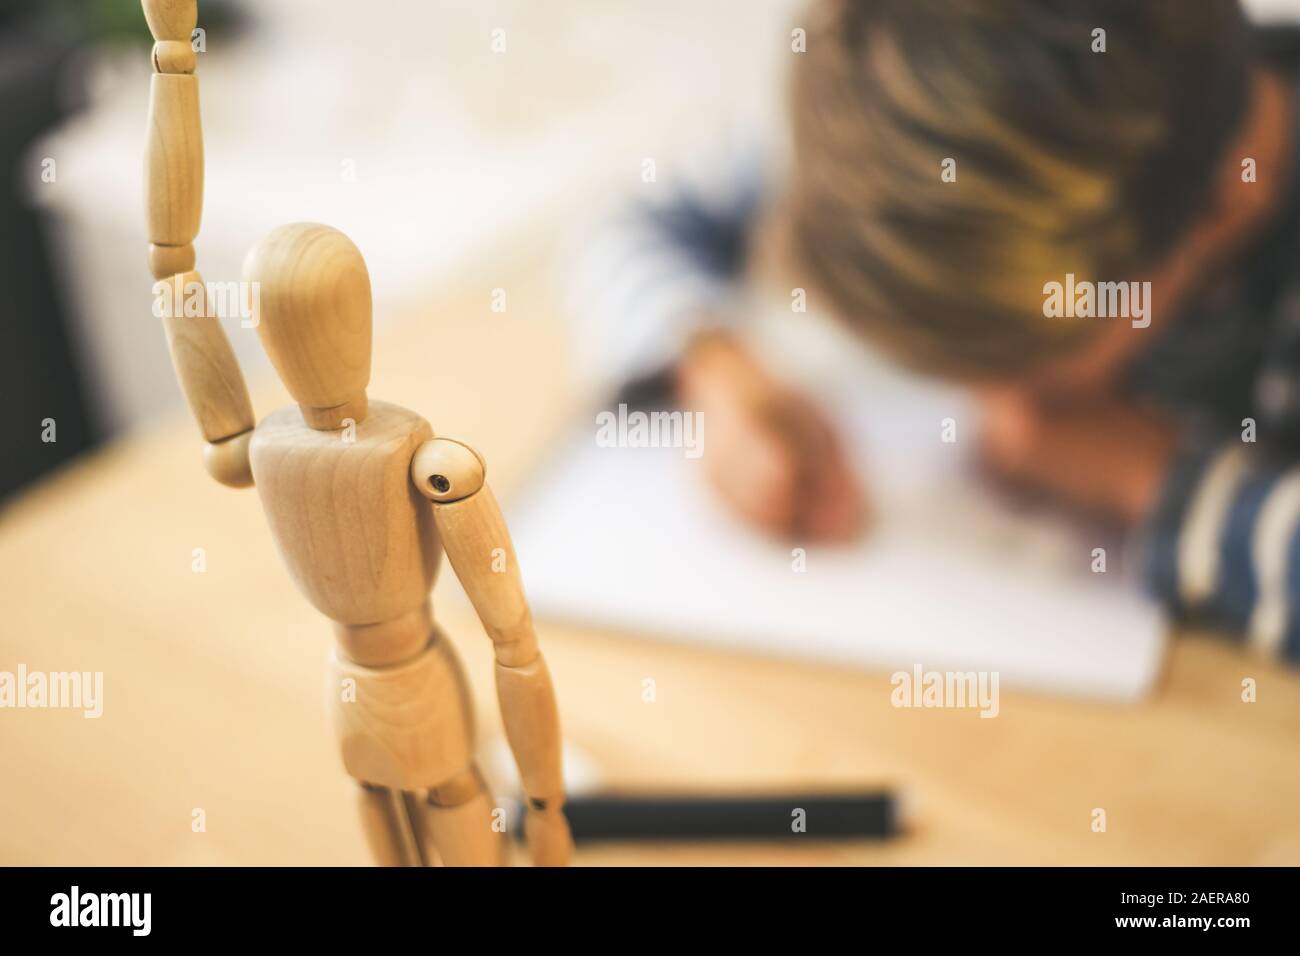 Student drawing with pencil a human figure be inspired by a wooden model.  Boy copying a dummy for school art tasks. Kid hold a pencil and draw a  manga Stock Photo 